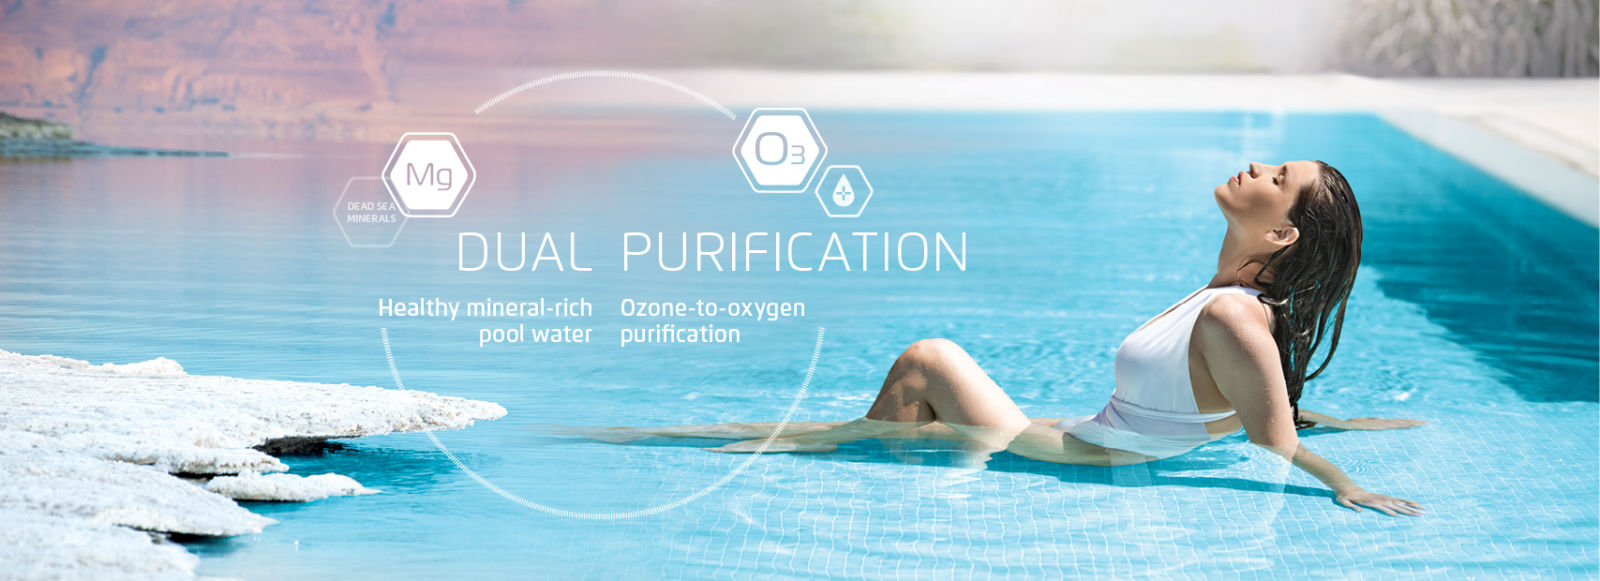 Dual purification healthy mineral-rich pool water and ozone-to-oxygen purification